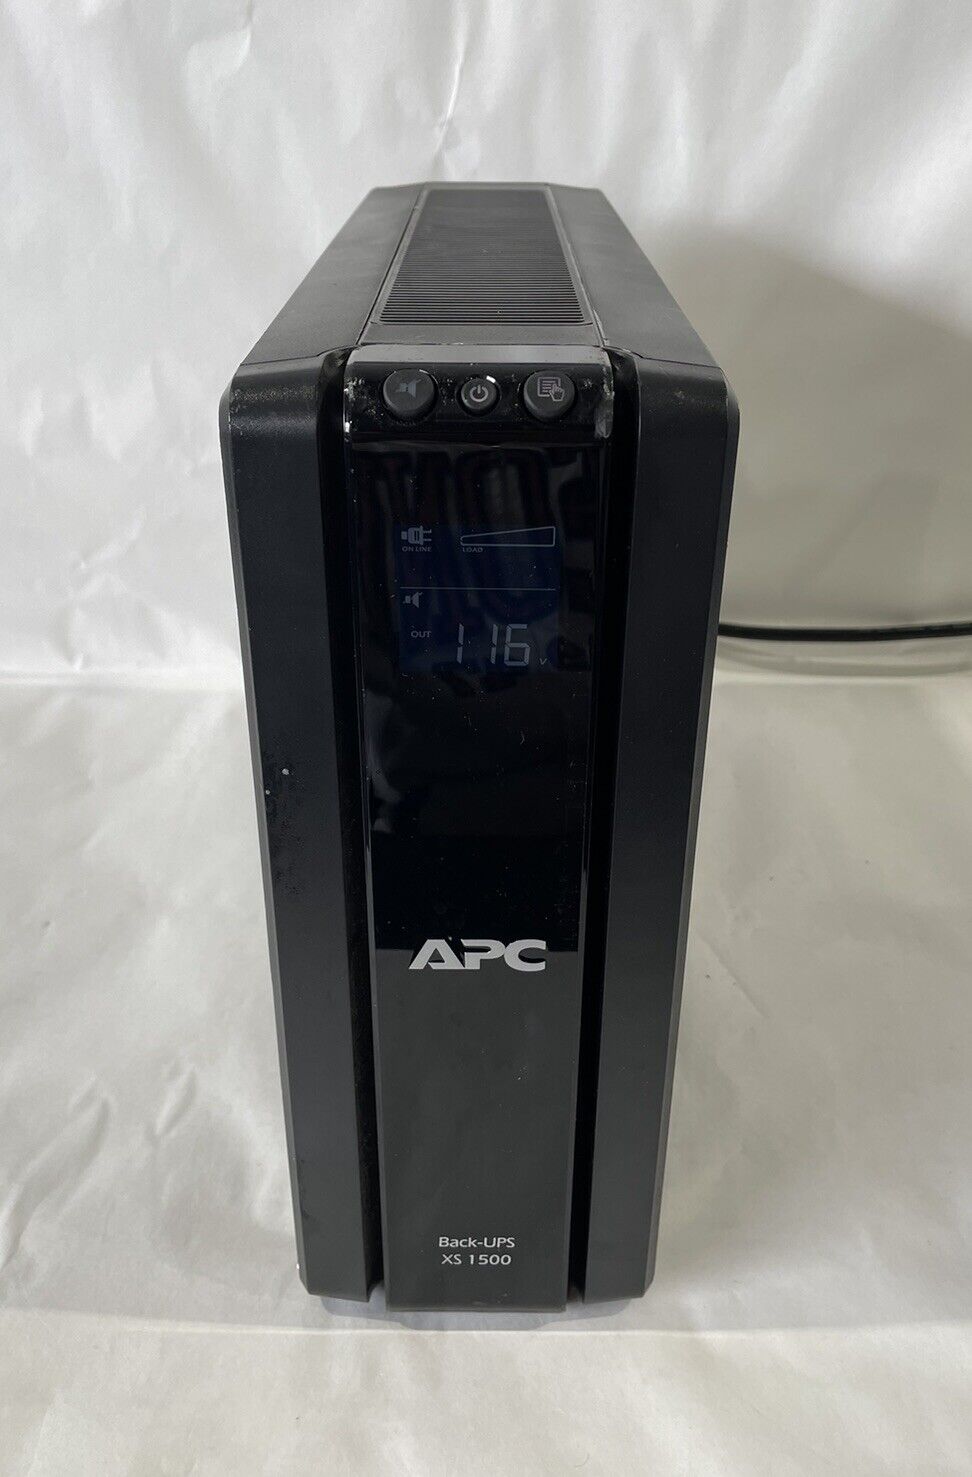 APC Back UPS XS 1500 10 Outlet Uninterruptable Power Supply BX1500G No Battery